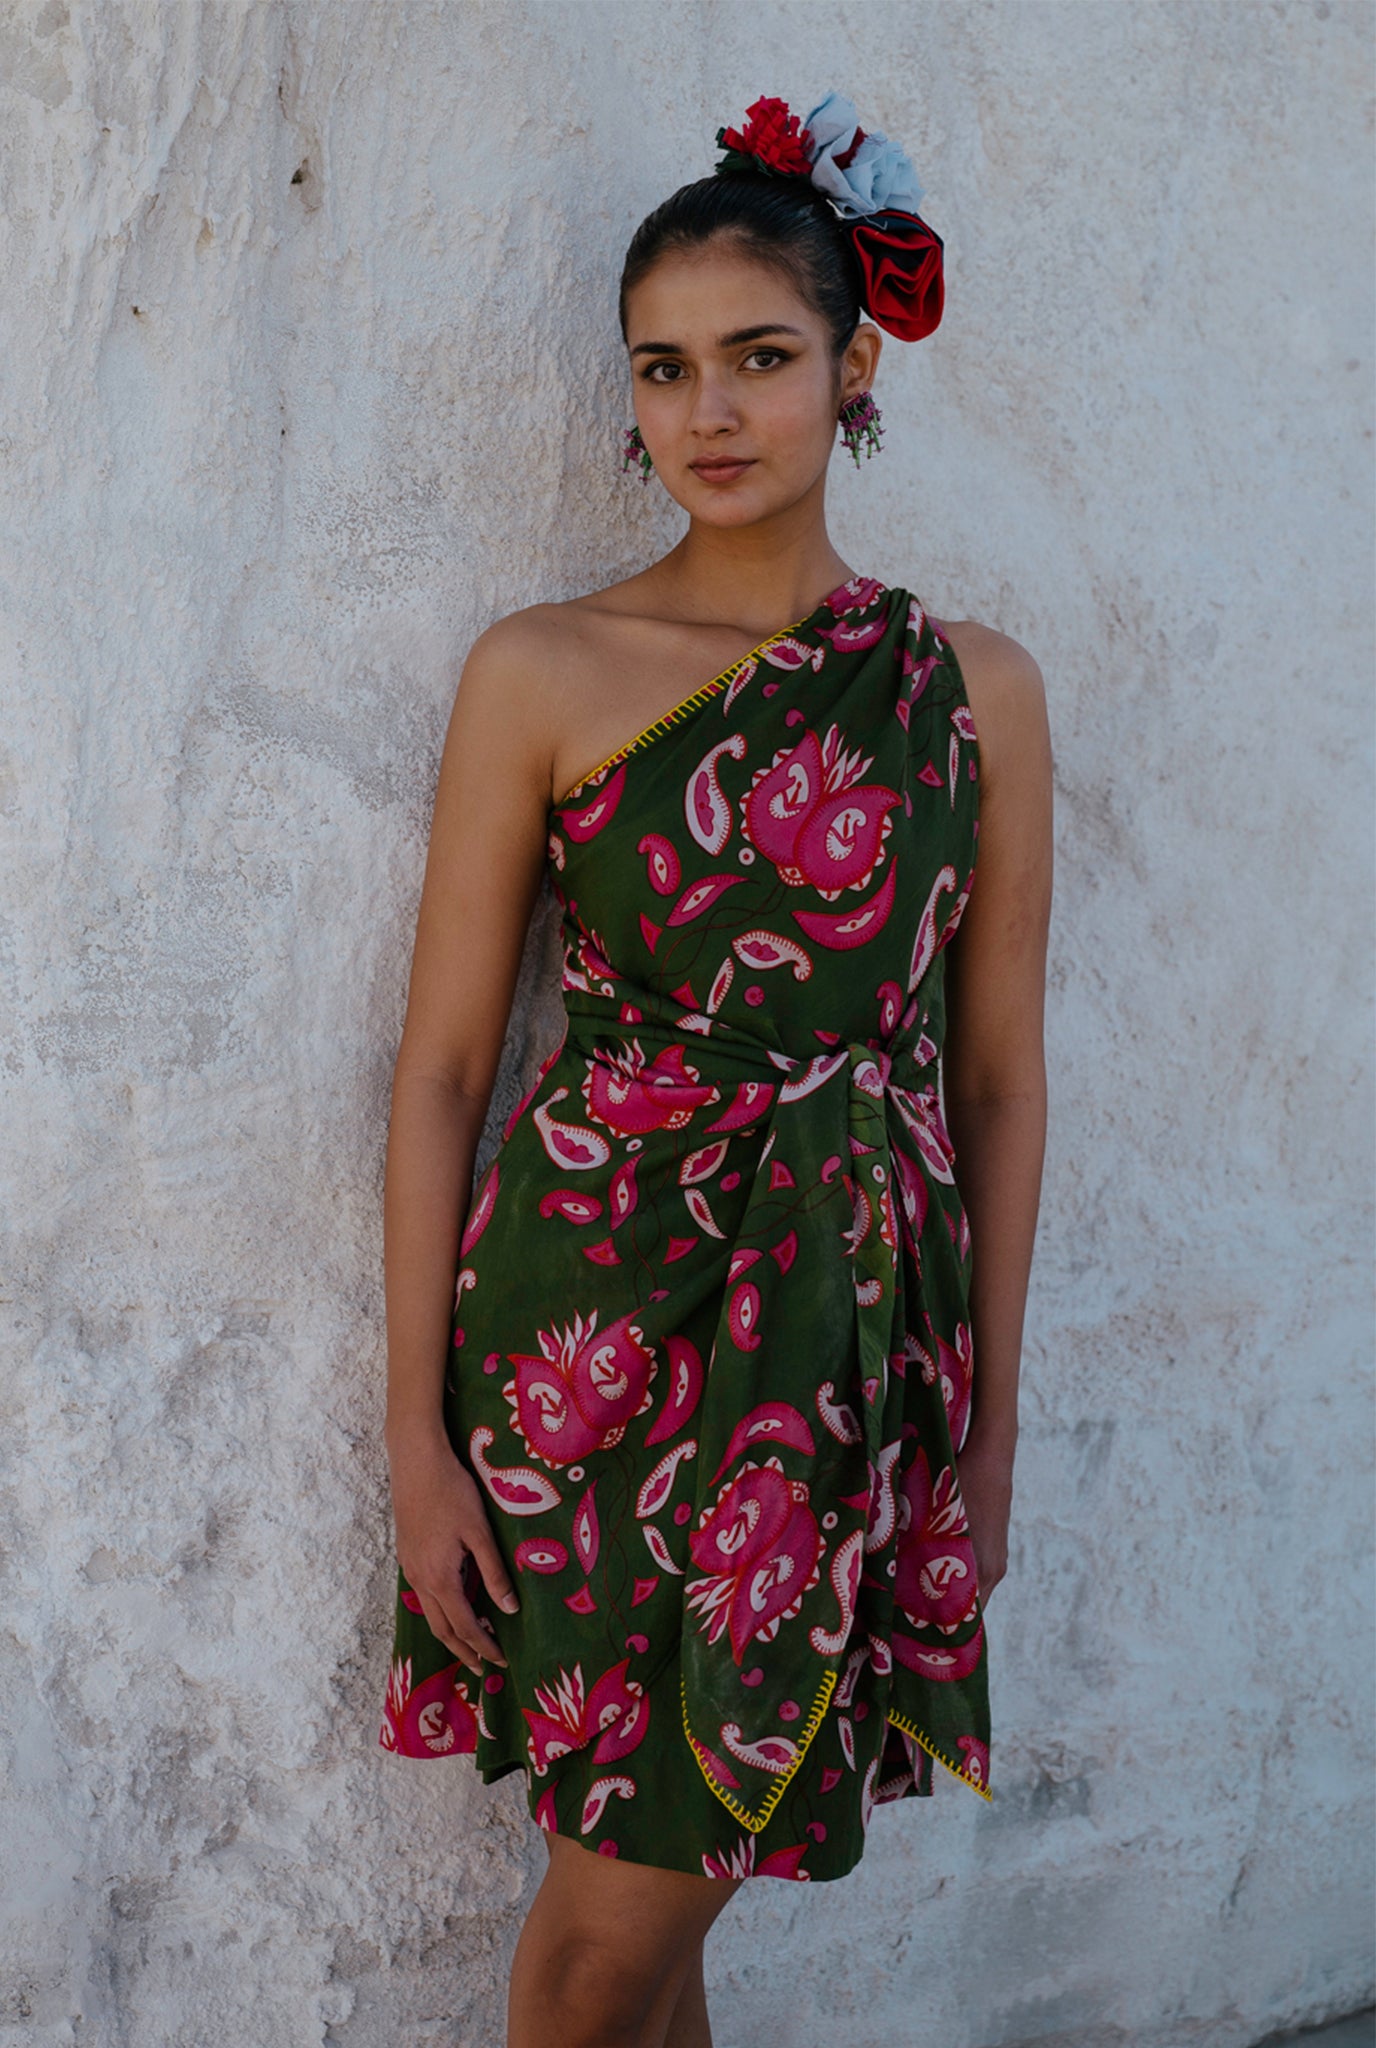 womenswear-handcrafted-sustainable-handblock-printed-one-shoulder-dress-the-jodi-life